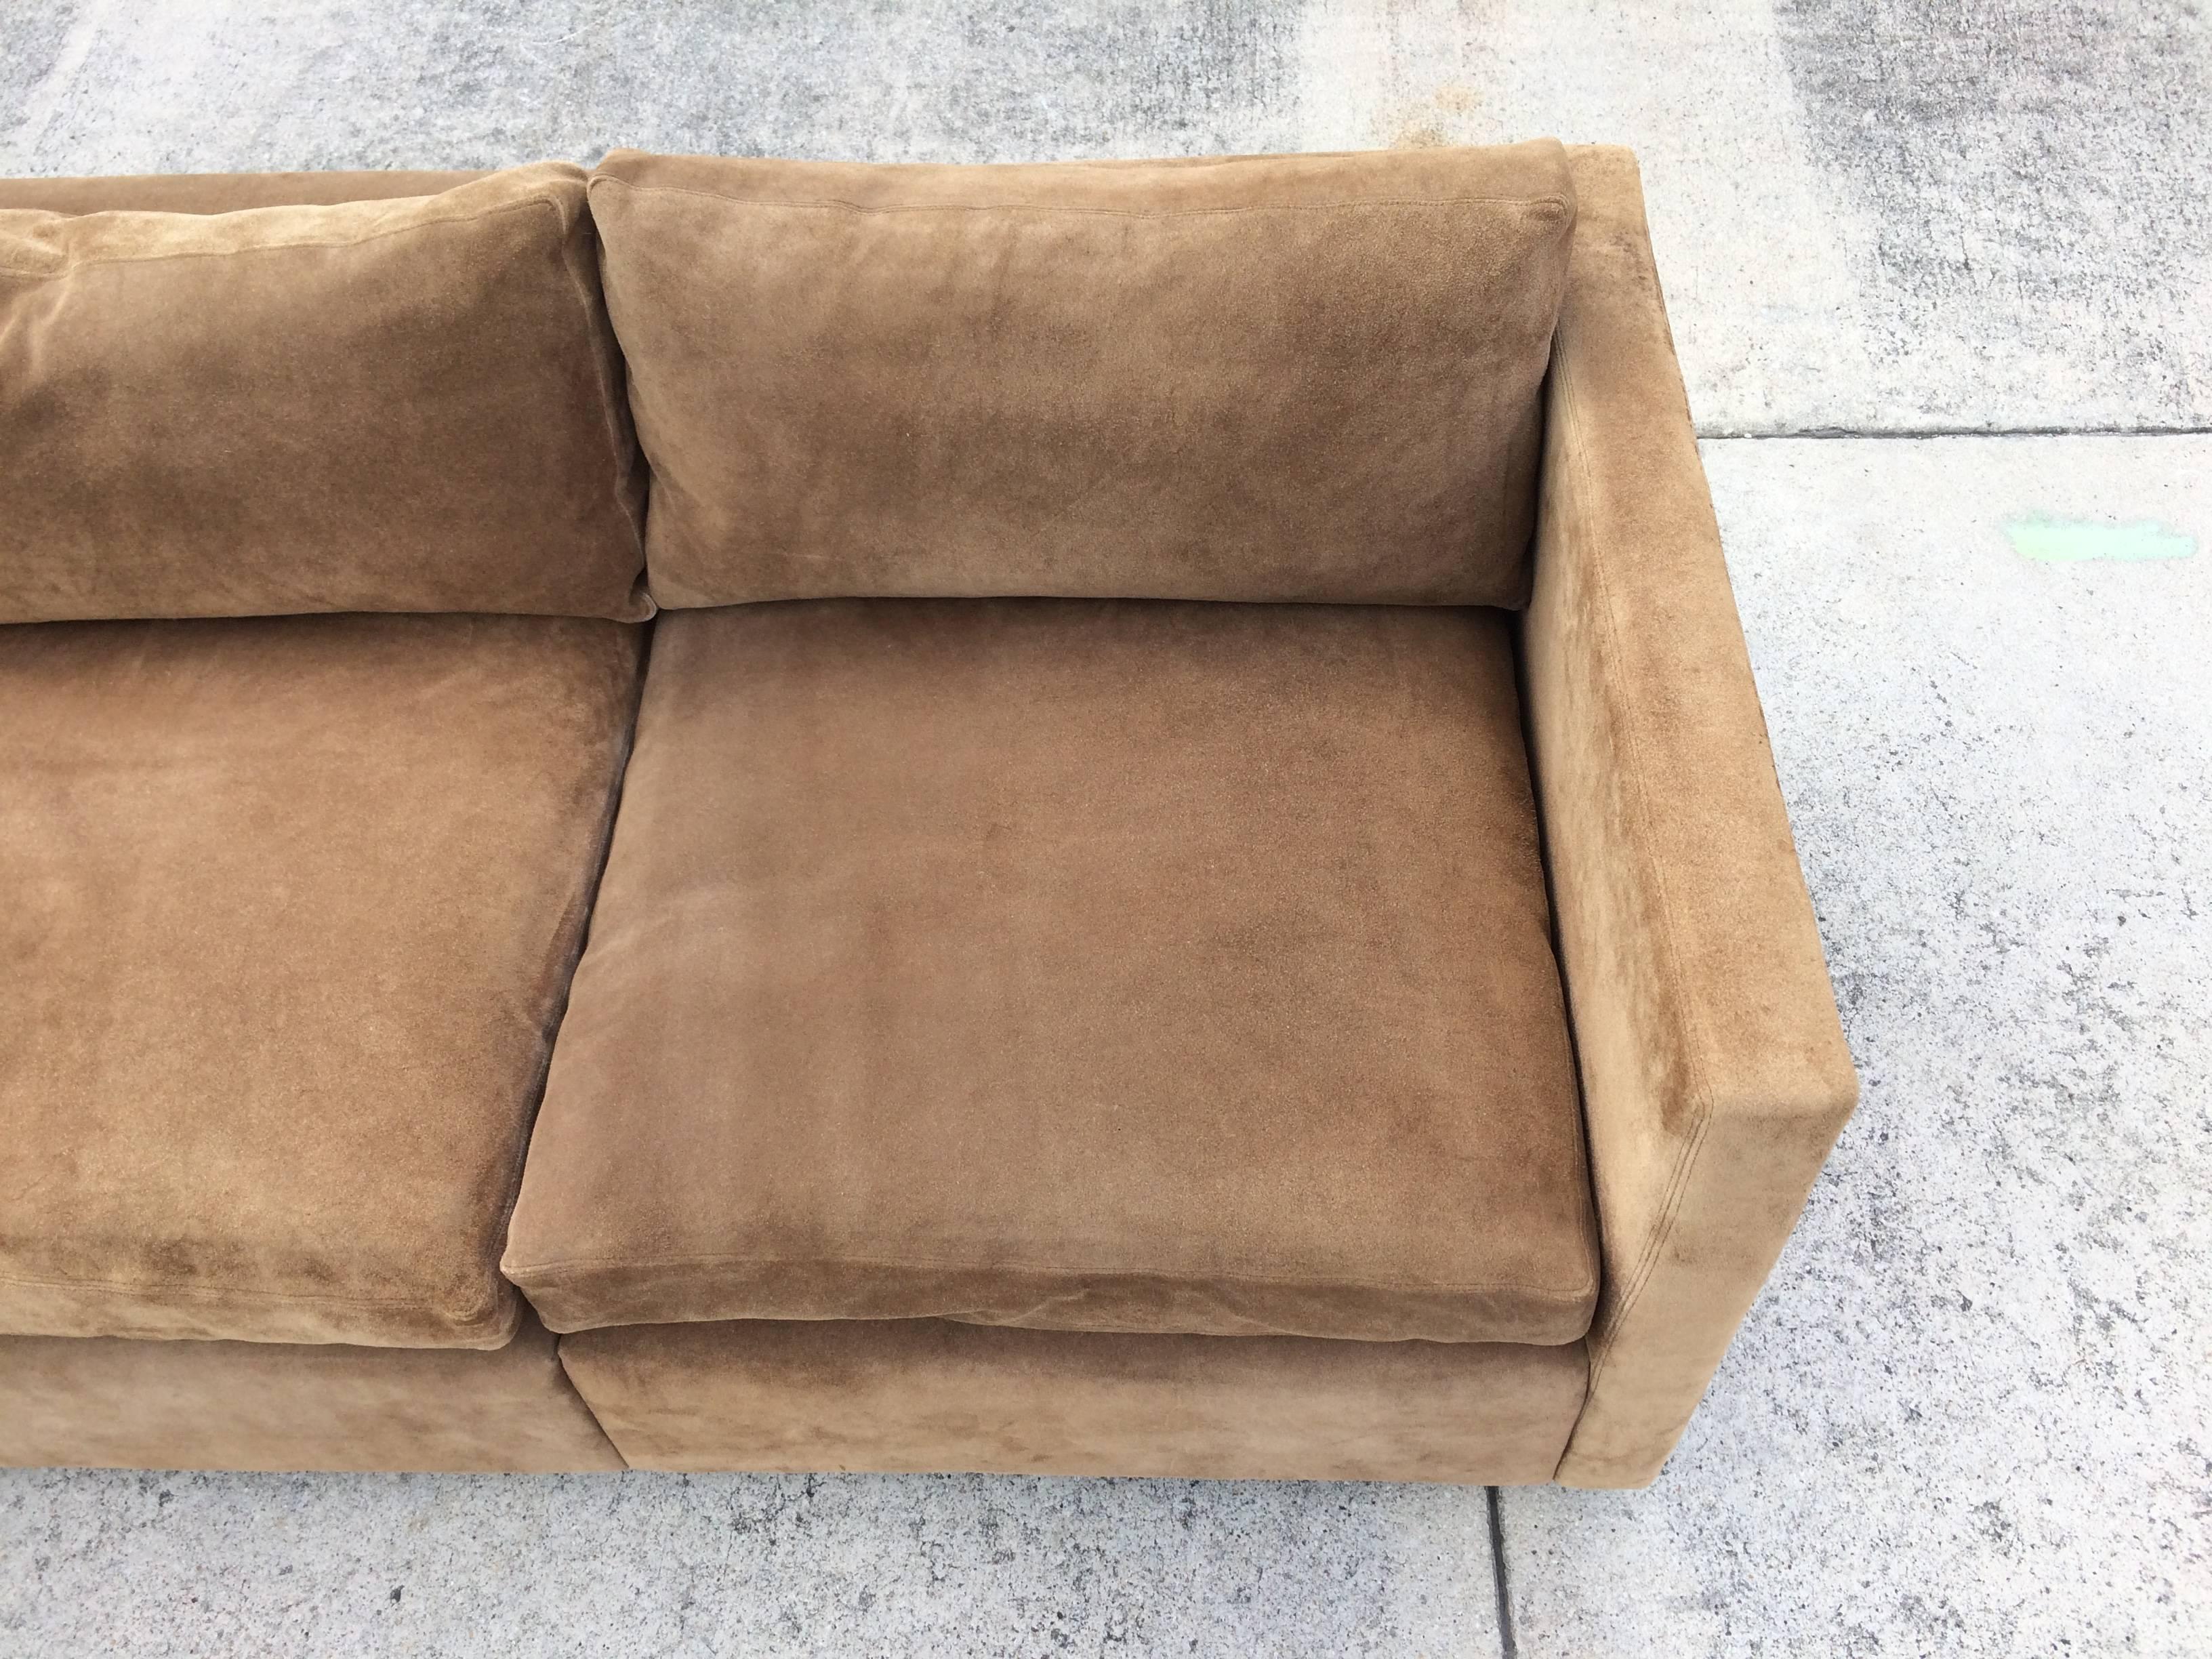 Late 20th Century Suede Leather Sofa by Charles Pfister for Knoll